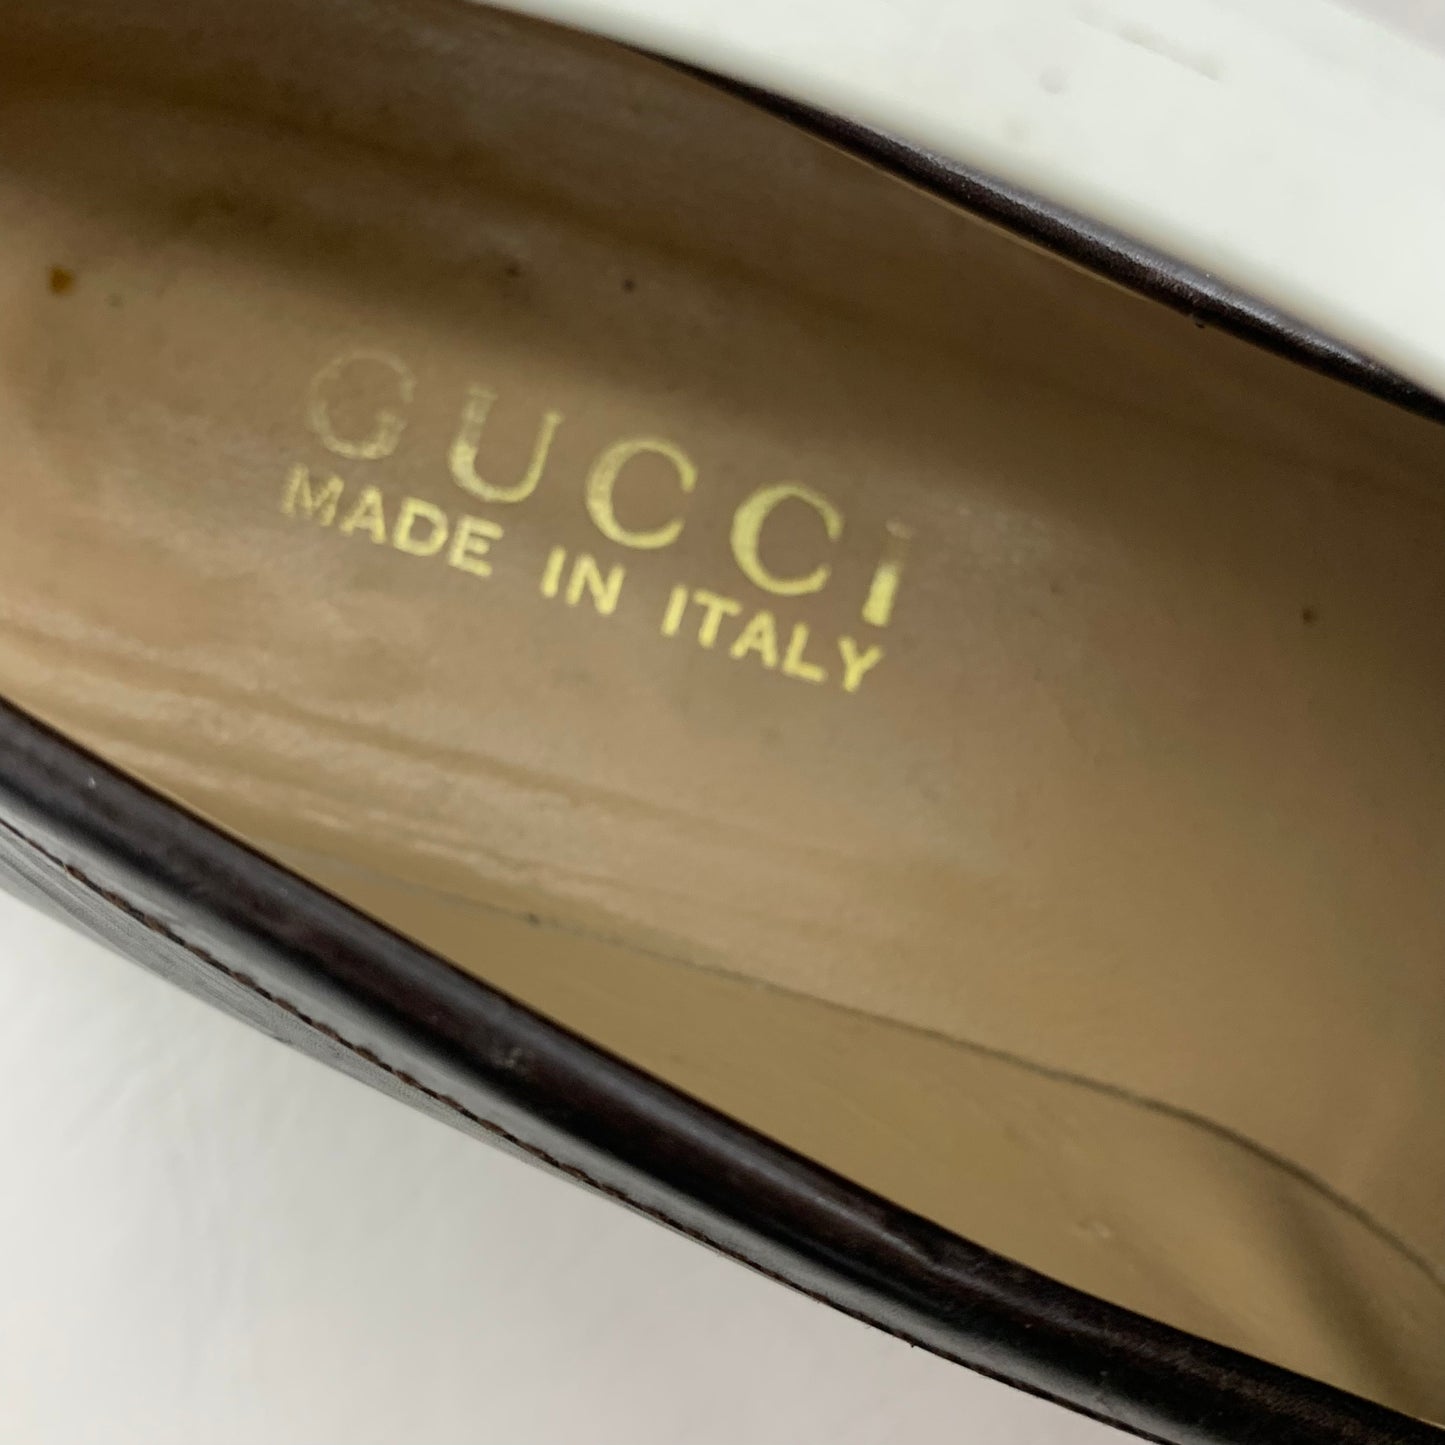 Authentic Gucci Brown Loafers Calf Hair Trim Sz 7.5